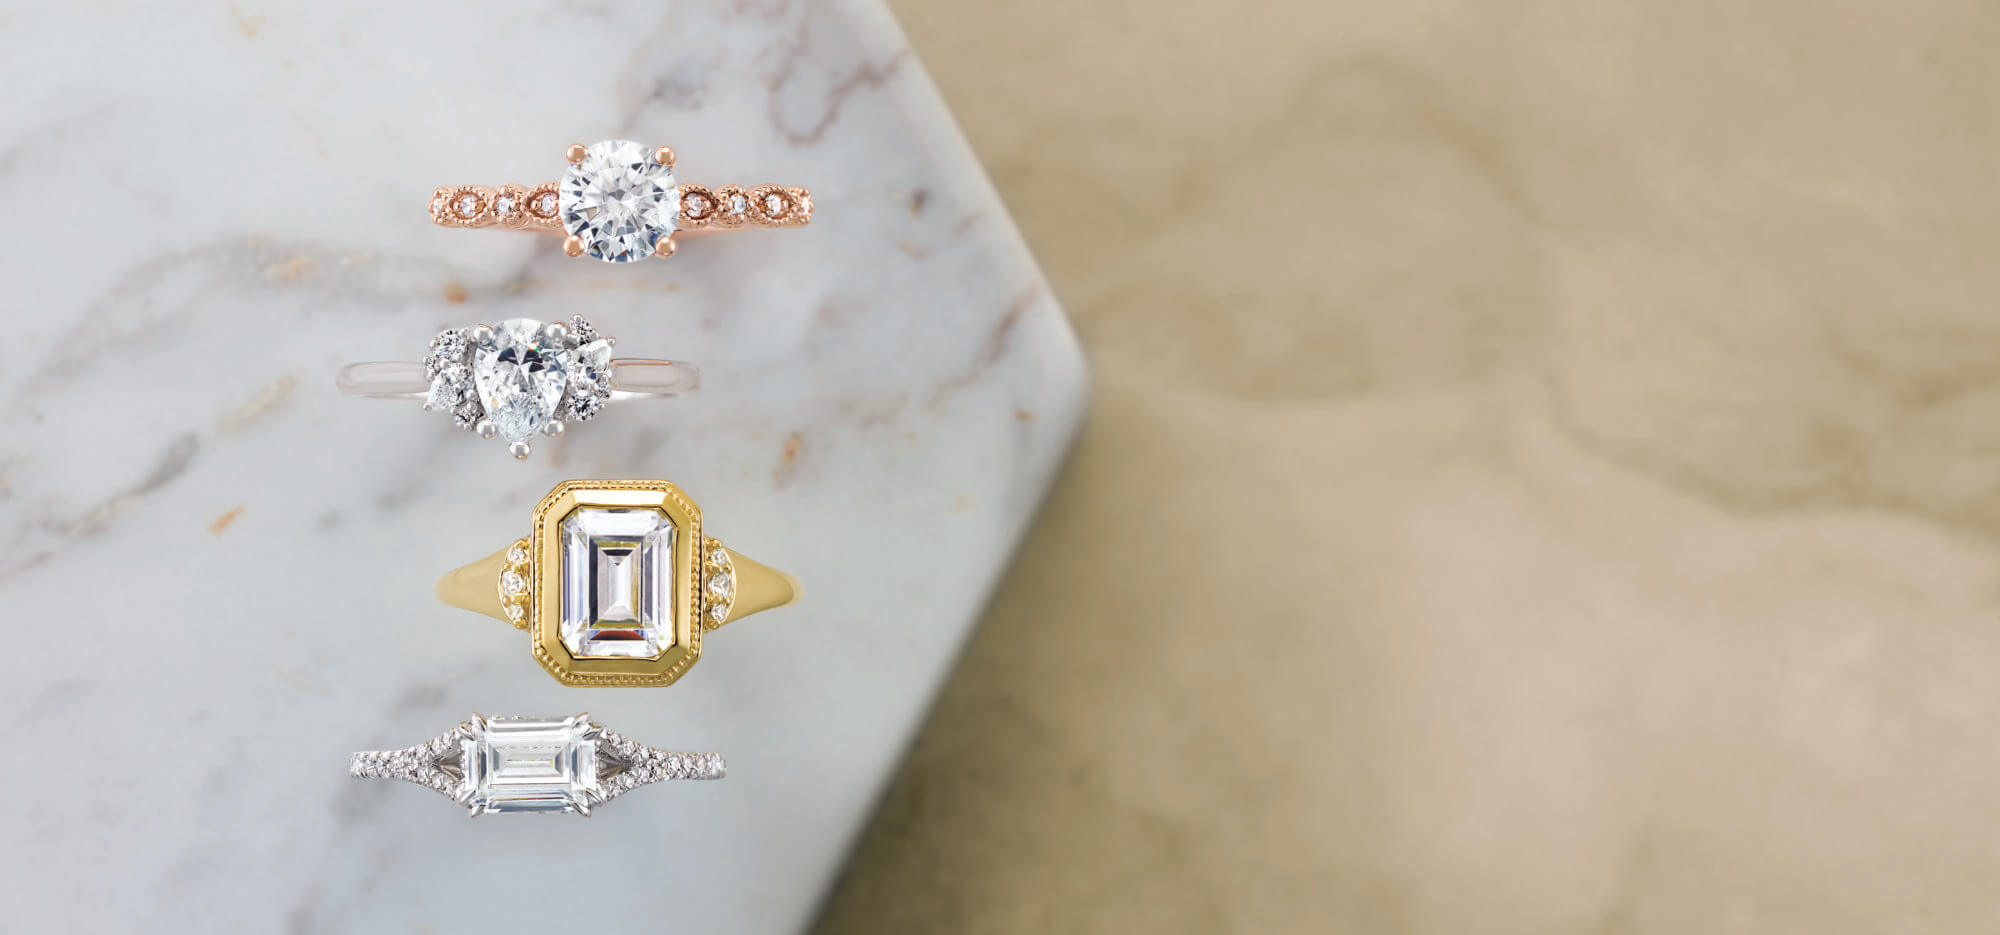 Four types of stunning engagement rings that are trending in 2023.